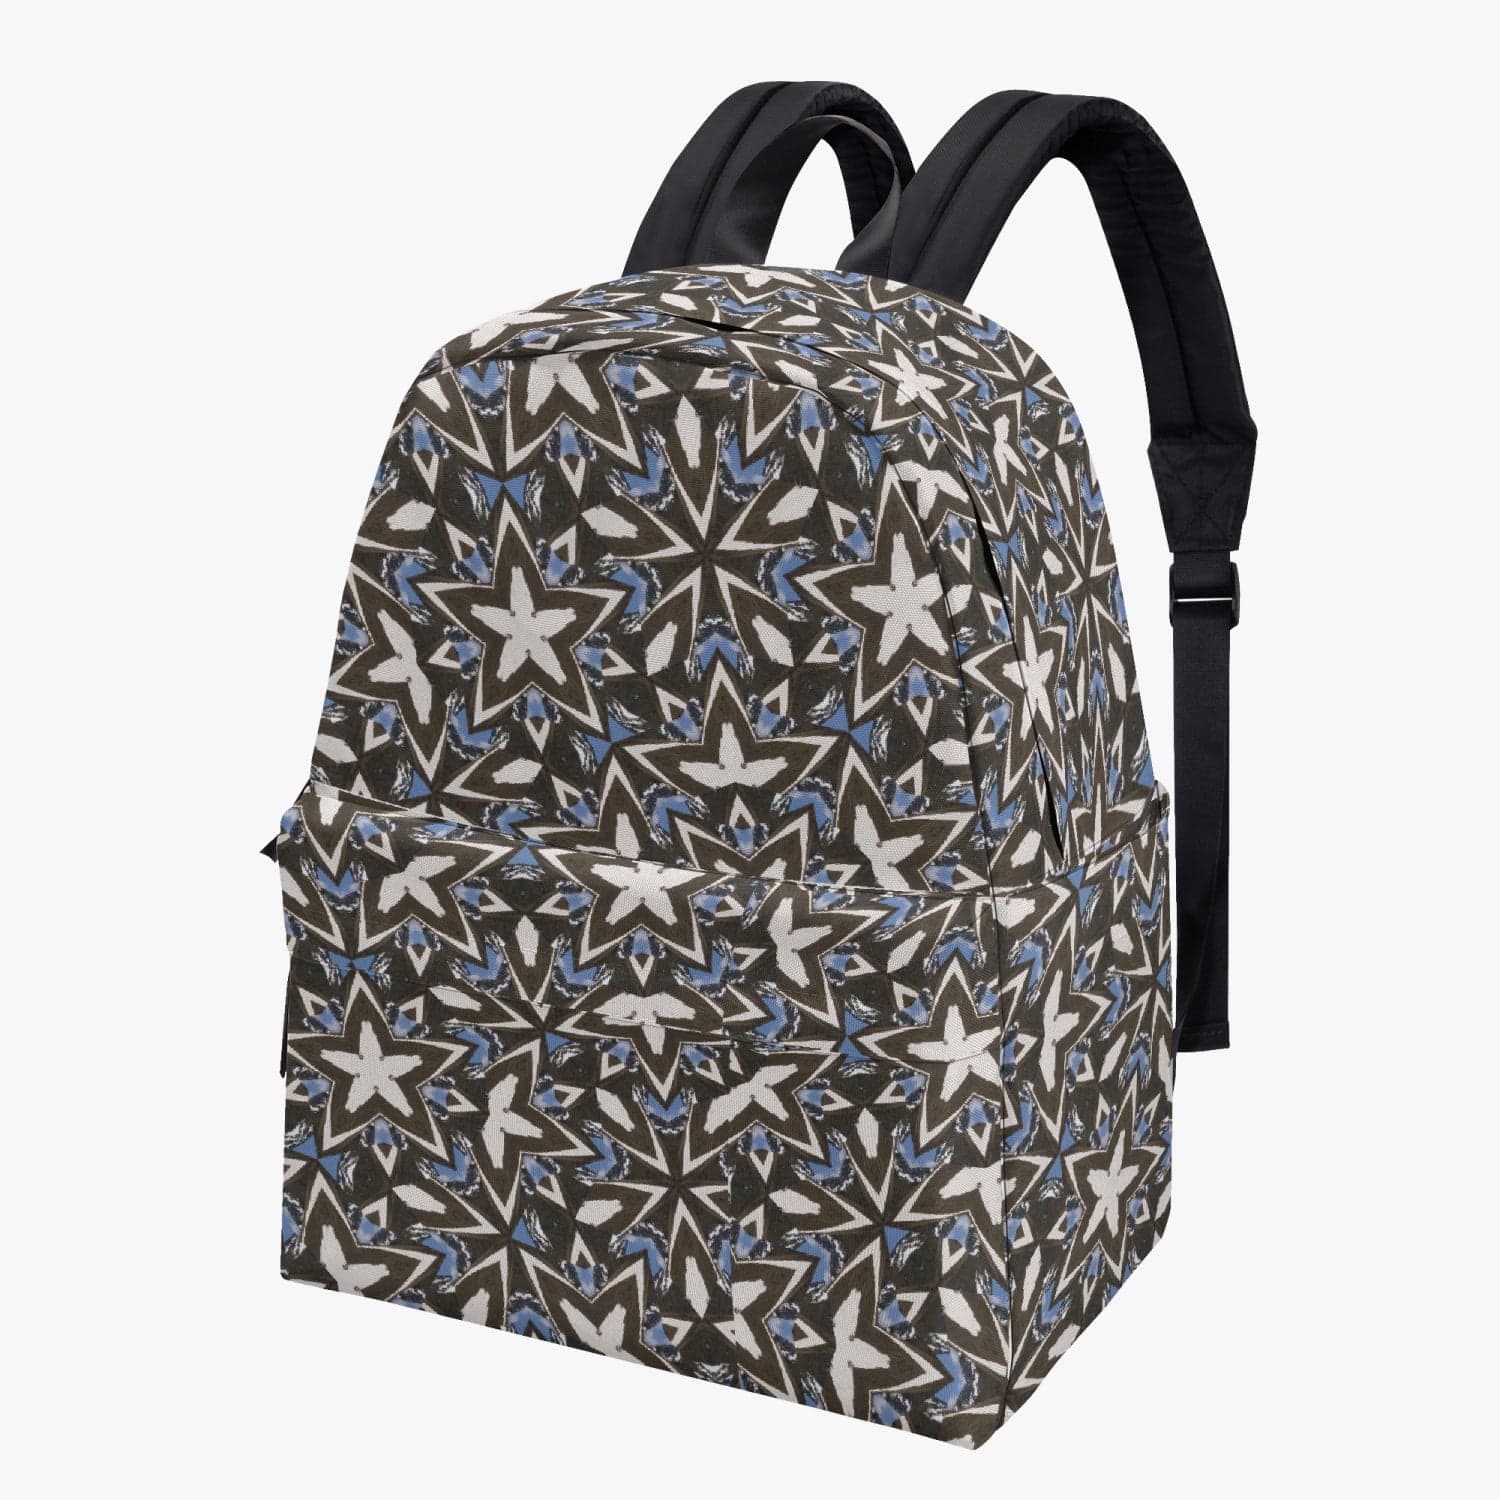 Mountain and sky, star pattern, Cotton Canvas Backpack, designed by Sensus Studio Design